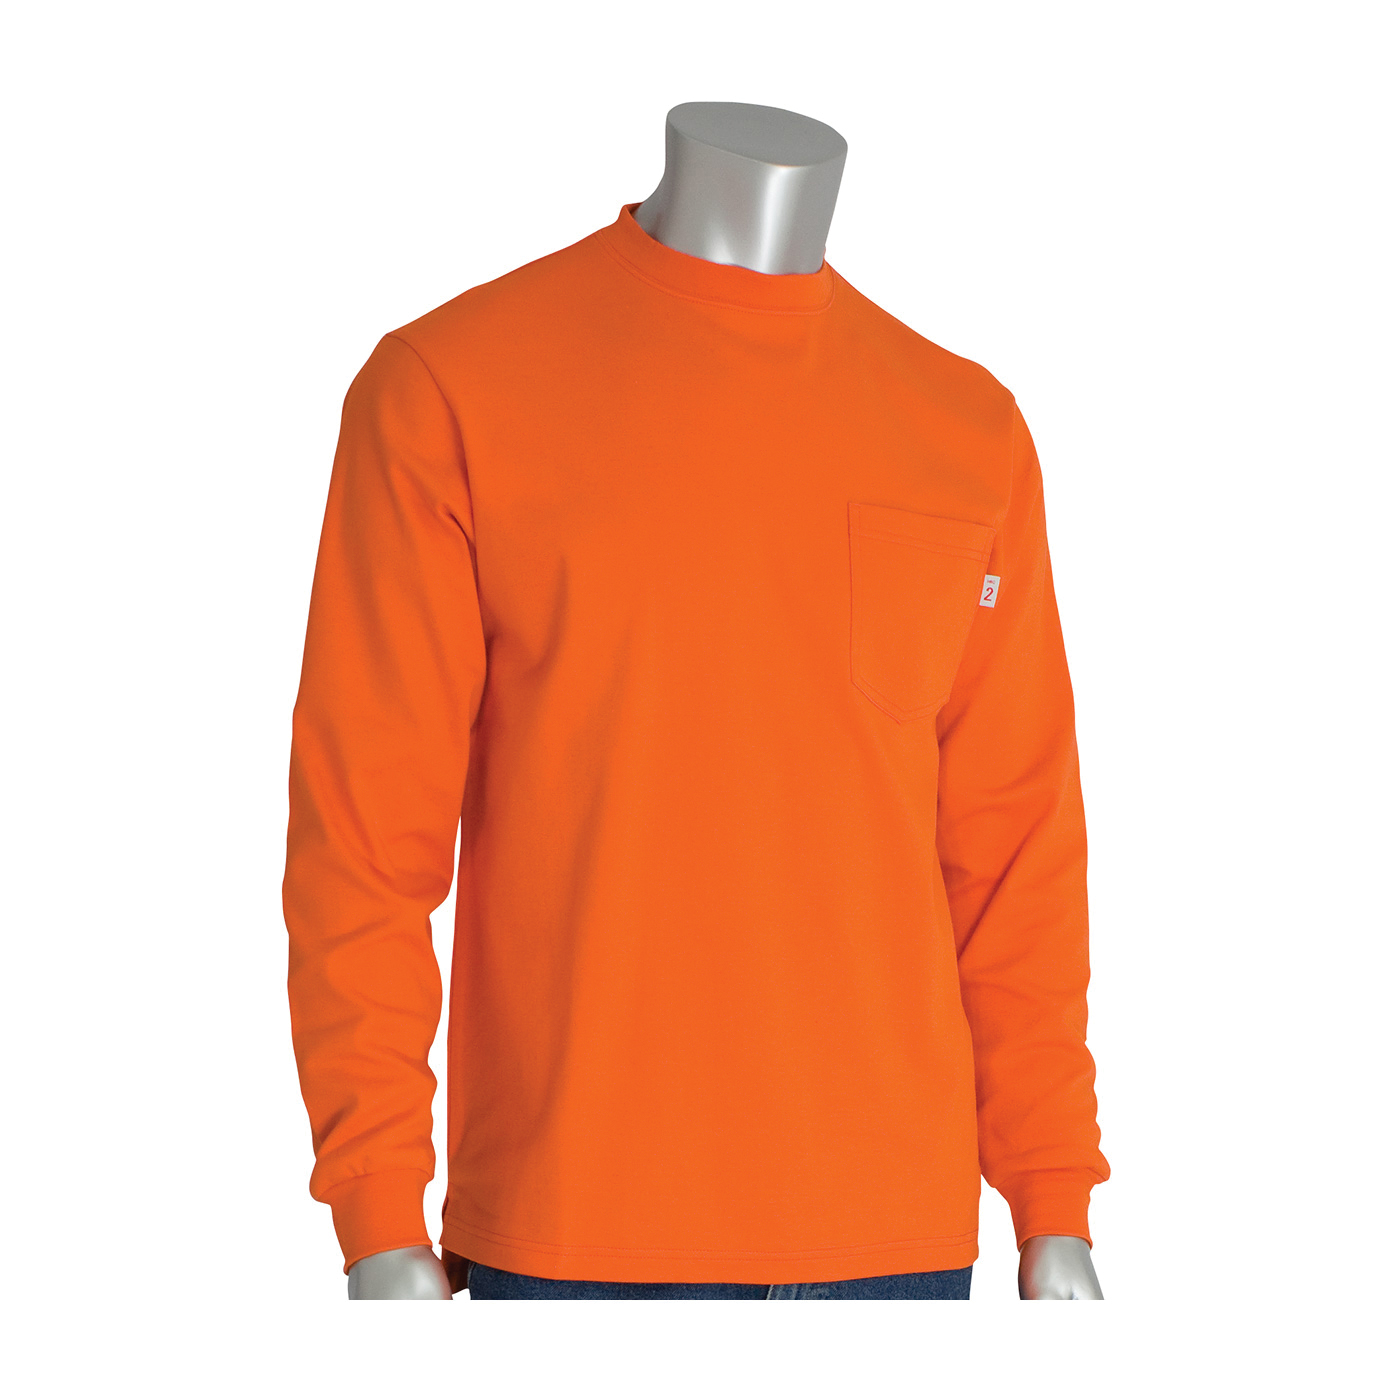 PIP® 385-FRLS-(OR)-3X Arc and Flame-Resistant Long Sleeve T-Shirt, 3XL, Orange, Cotton Interlock Knit, 35 in L